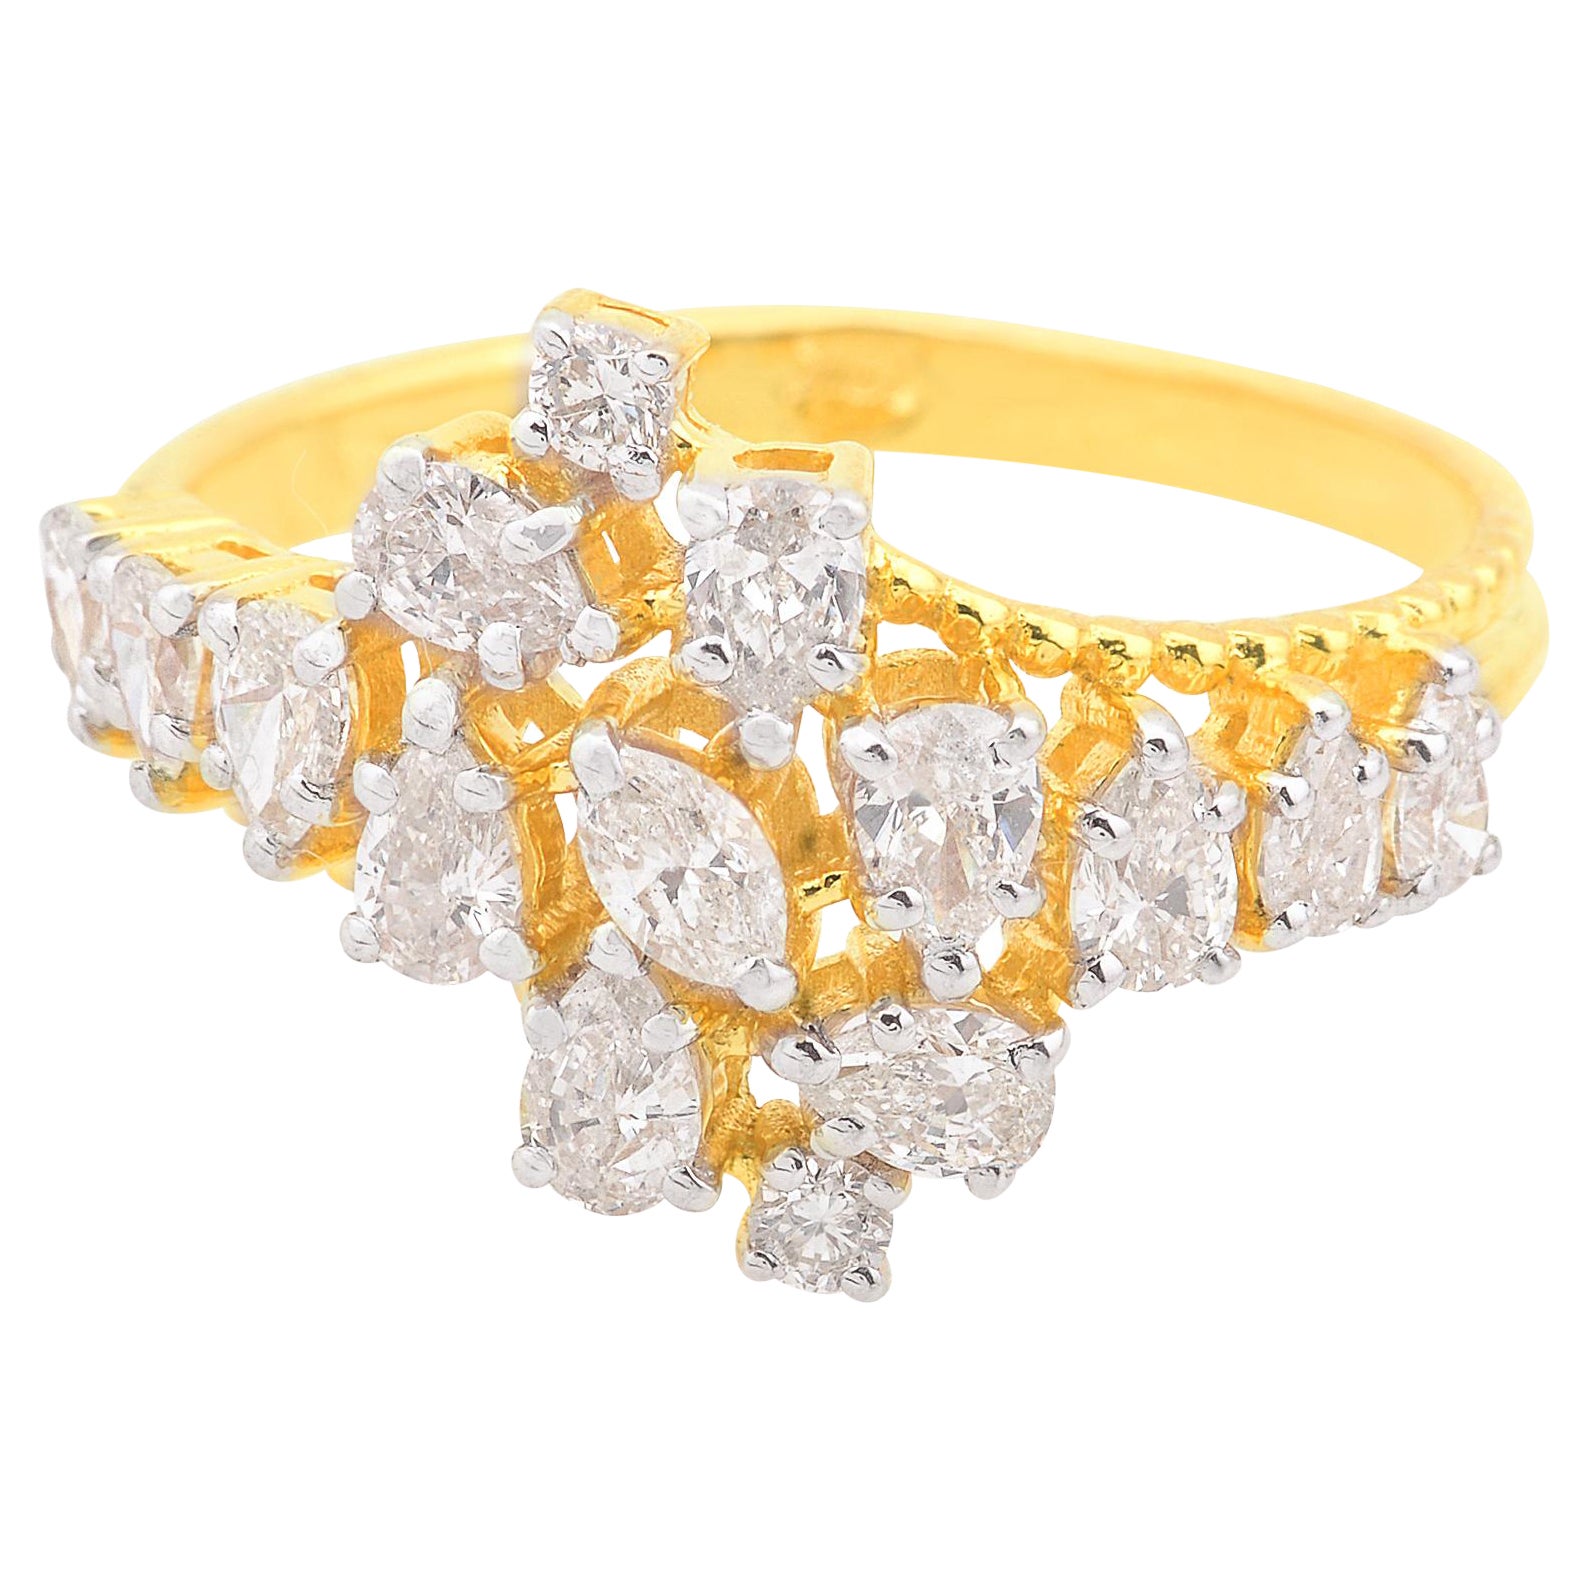 SI Clarity HI Color Marquise Pear Diamond Promise Ring 18 Karat Yellow Gold